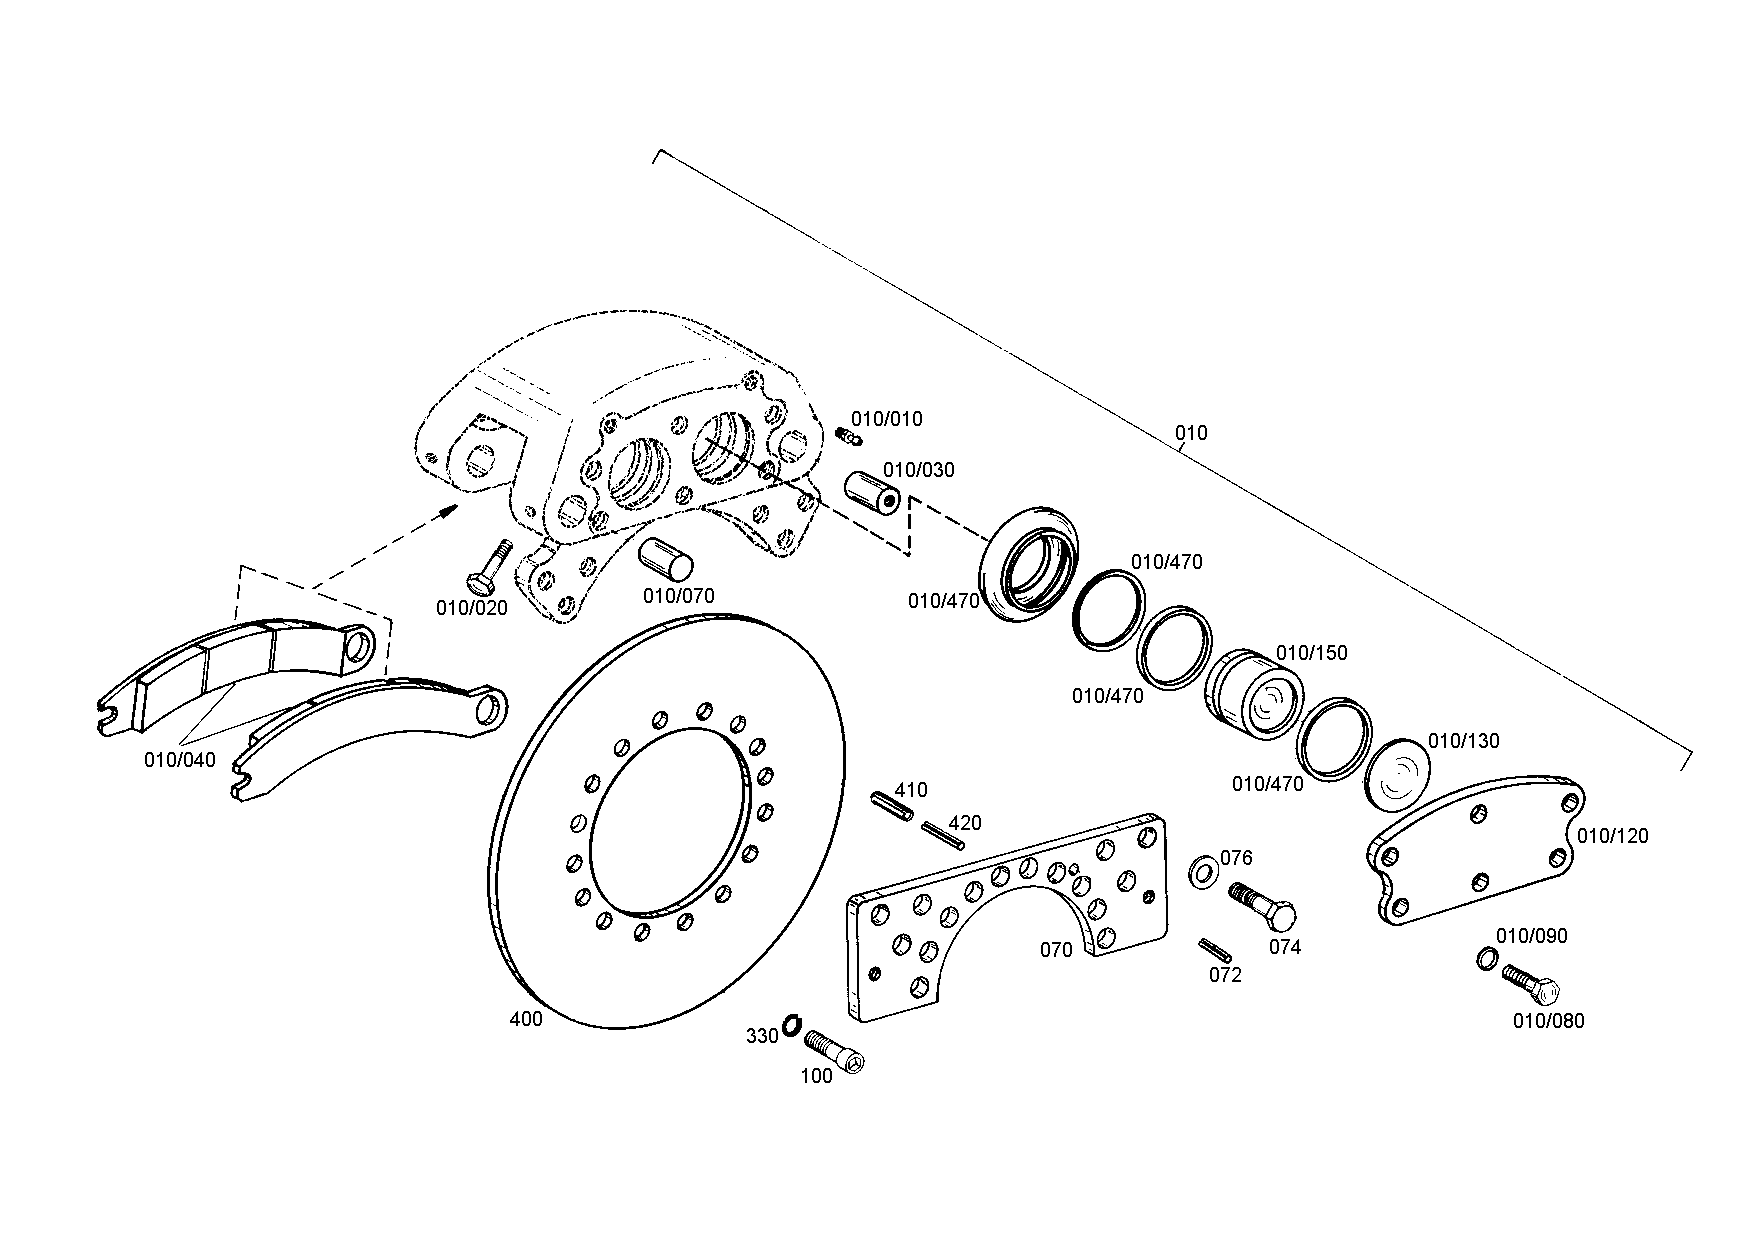 drawing for CNH NEW HOLLAND 8900134947 - BRAKE CALIPER (figure 3)